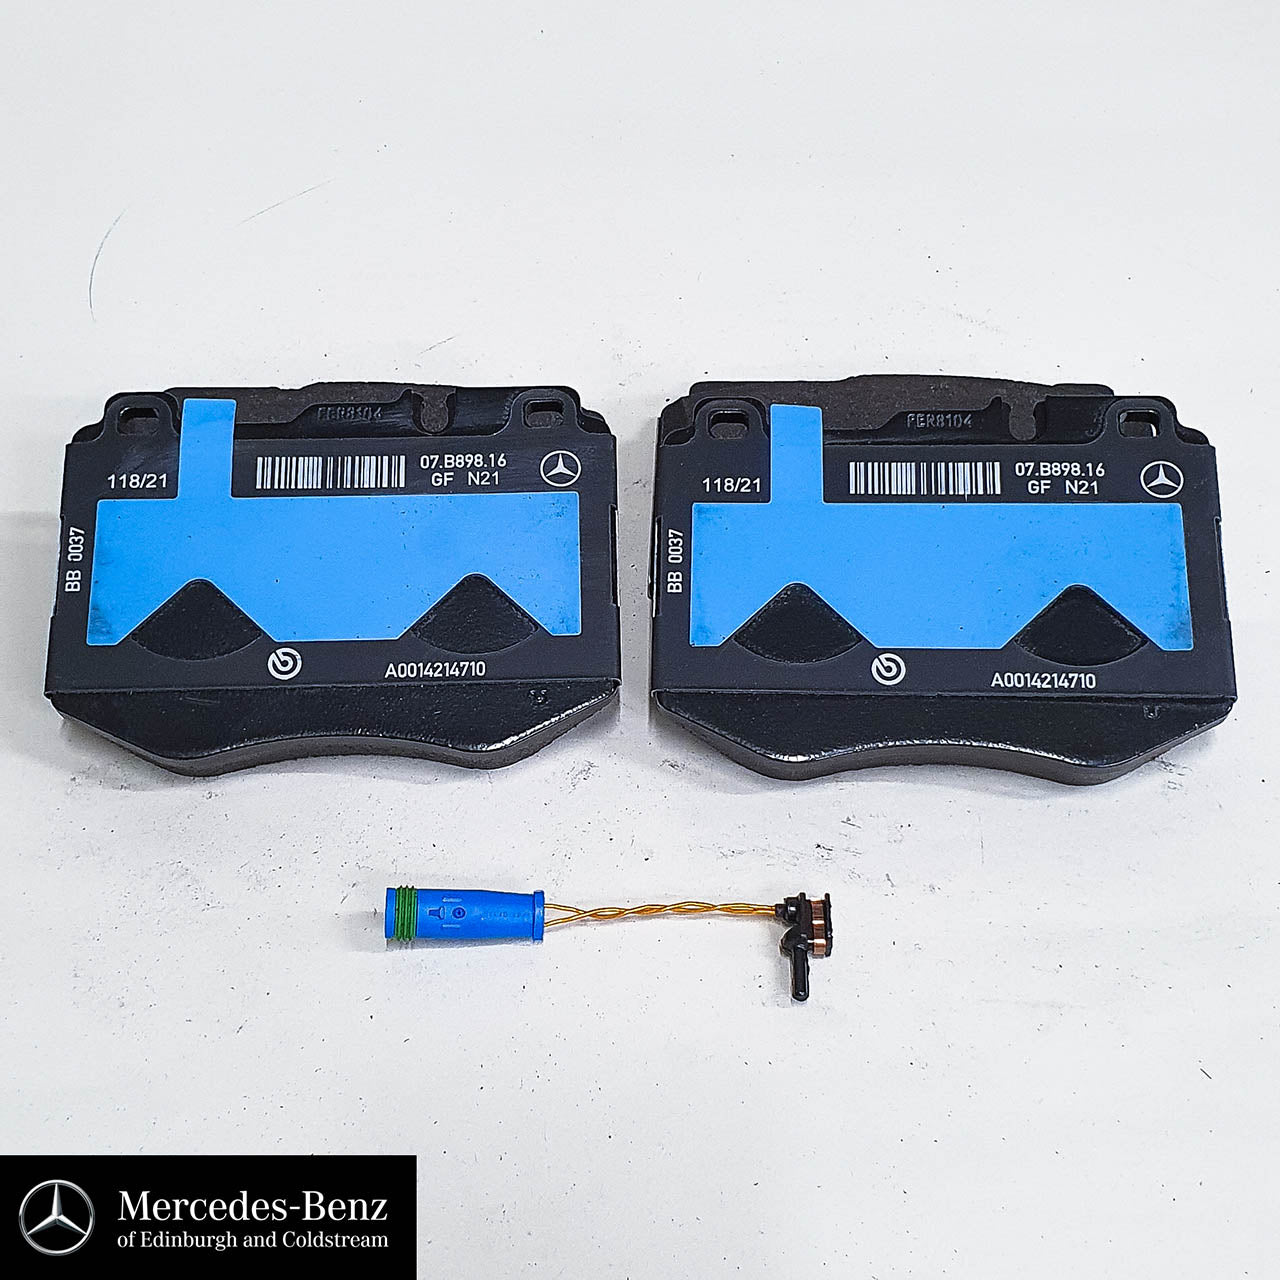 Genuine Mercedes Front Brake Pads C Class E Class models with Sports Brake Package